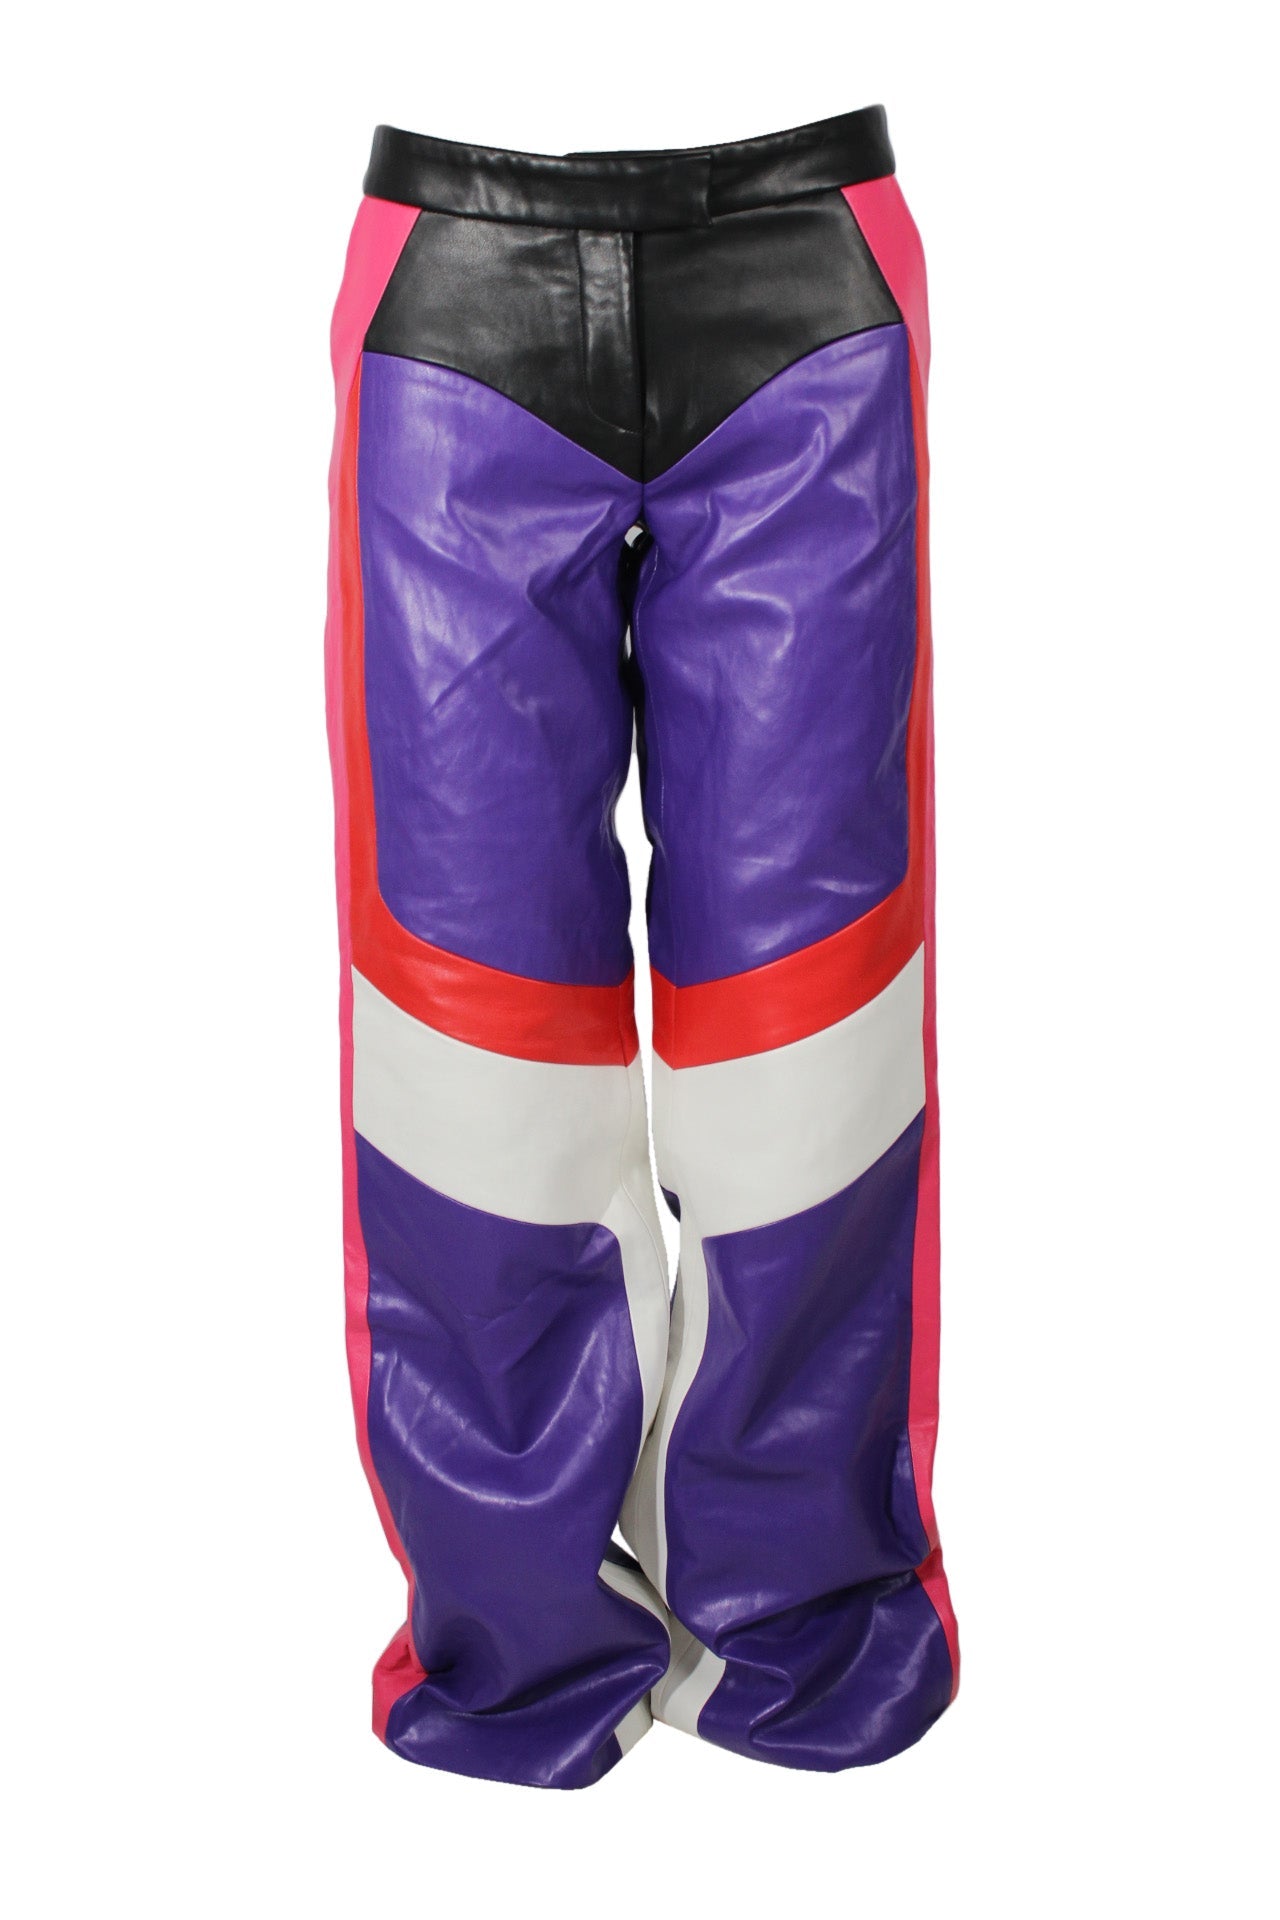 lado bokuchava multicolor vegan leather pants. features purple/pink/red/white/black geometrical shapes design throughout, straight leg, zip and snap button closure.